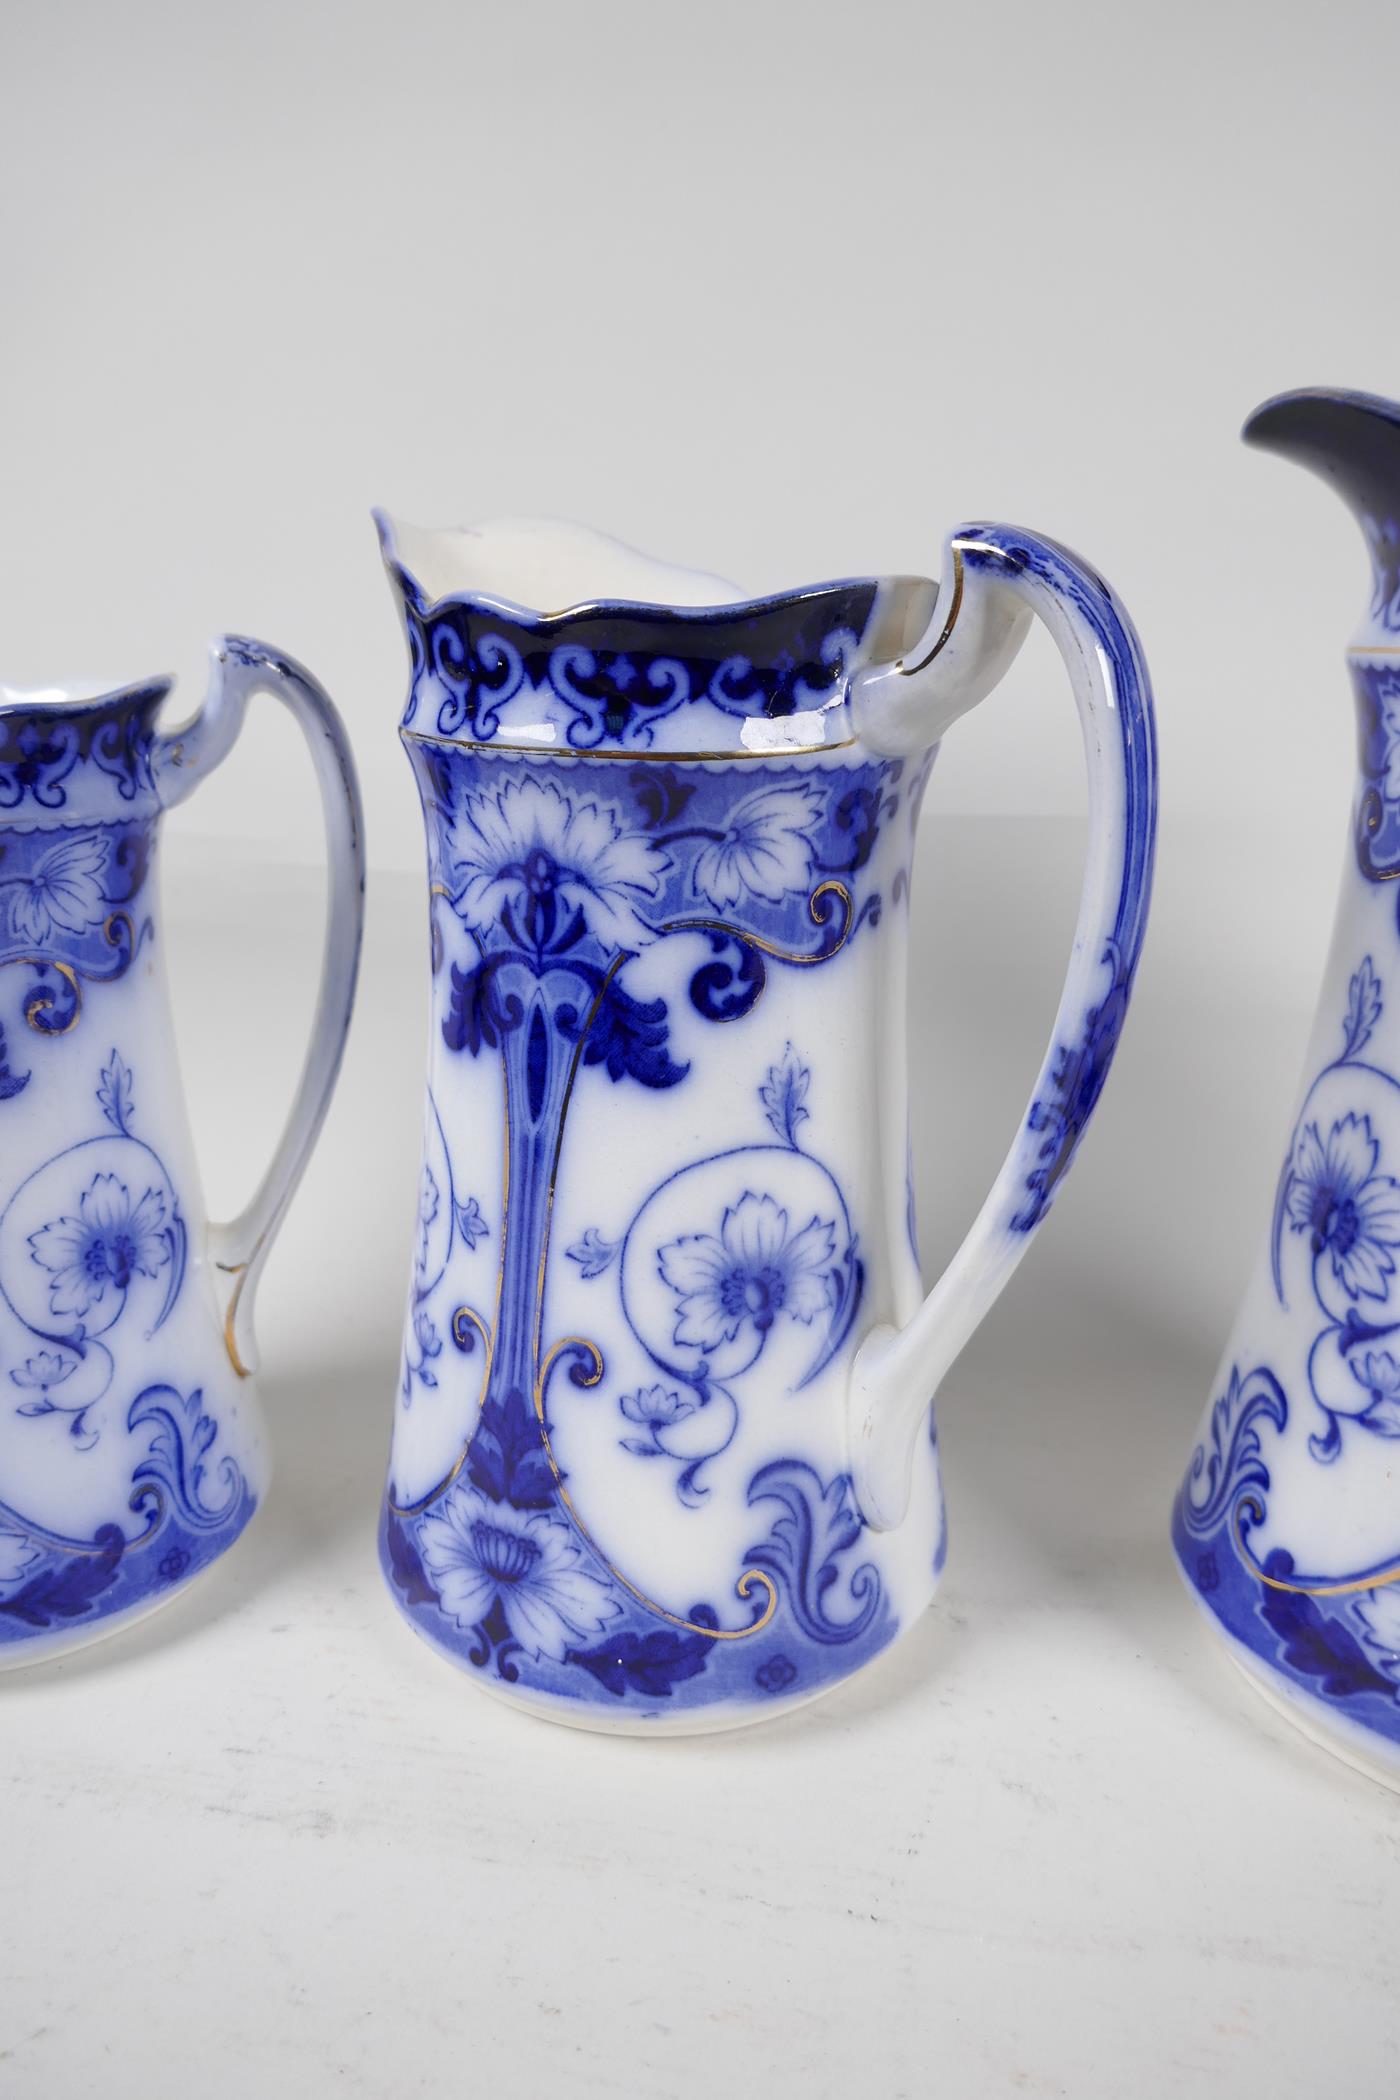 A set of three graduated Art Nouveau blue and white pottery jugs with gilt embellishments from F & - Image 2 of 3